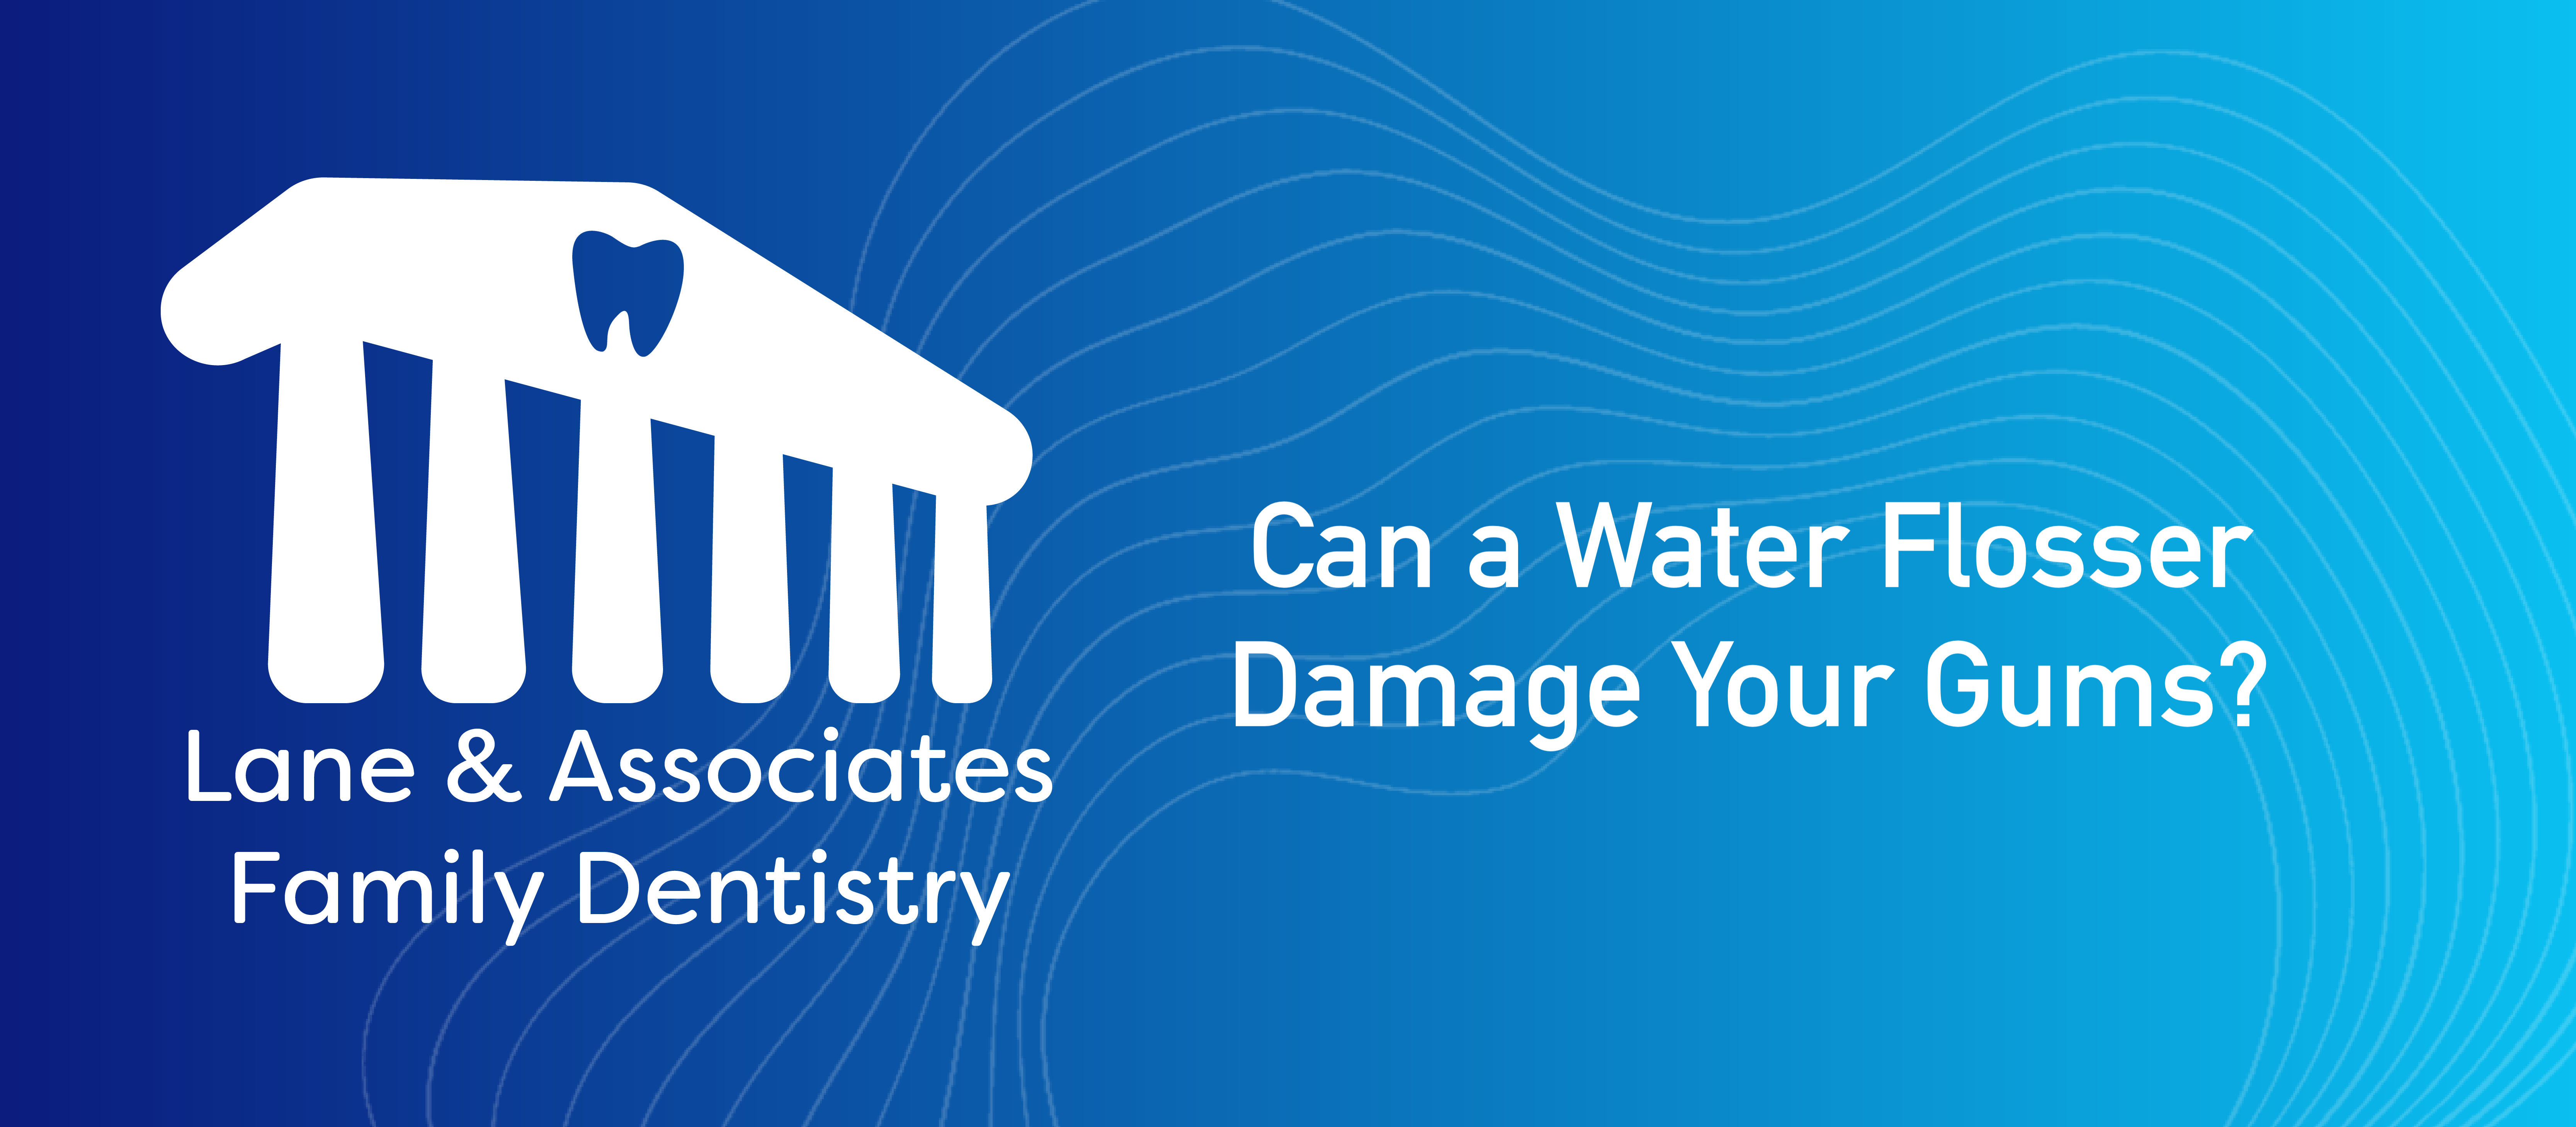 Can a water flosser damage your gums